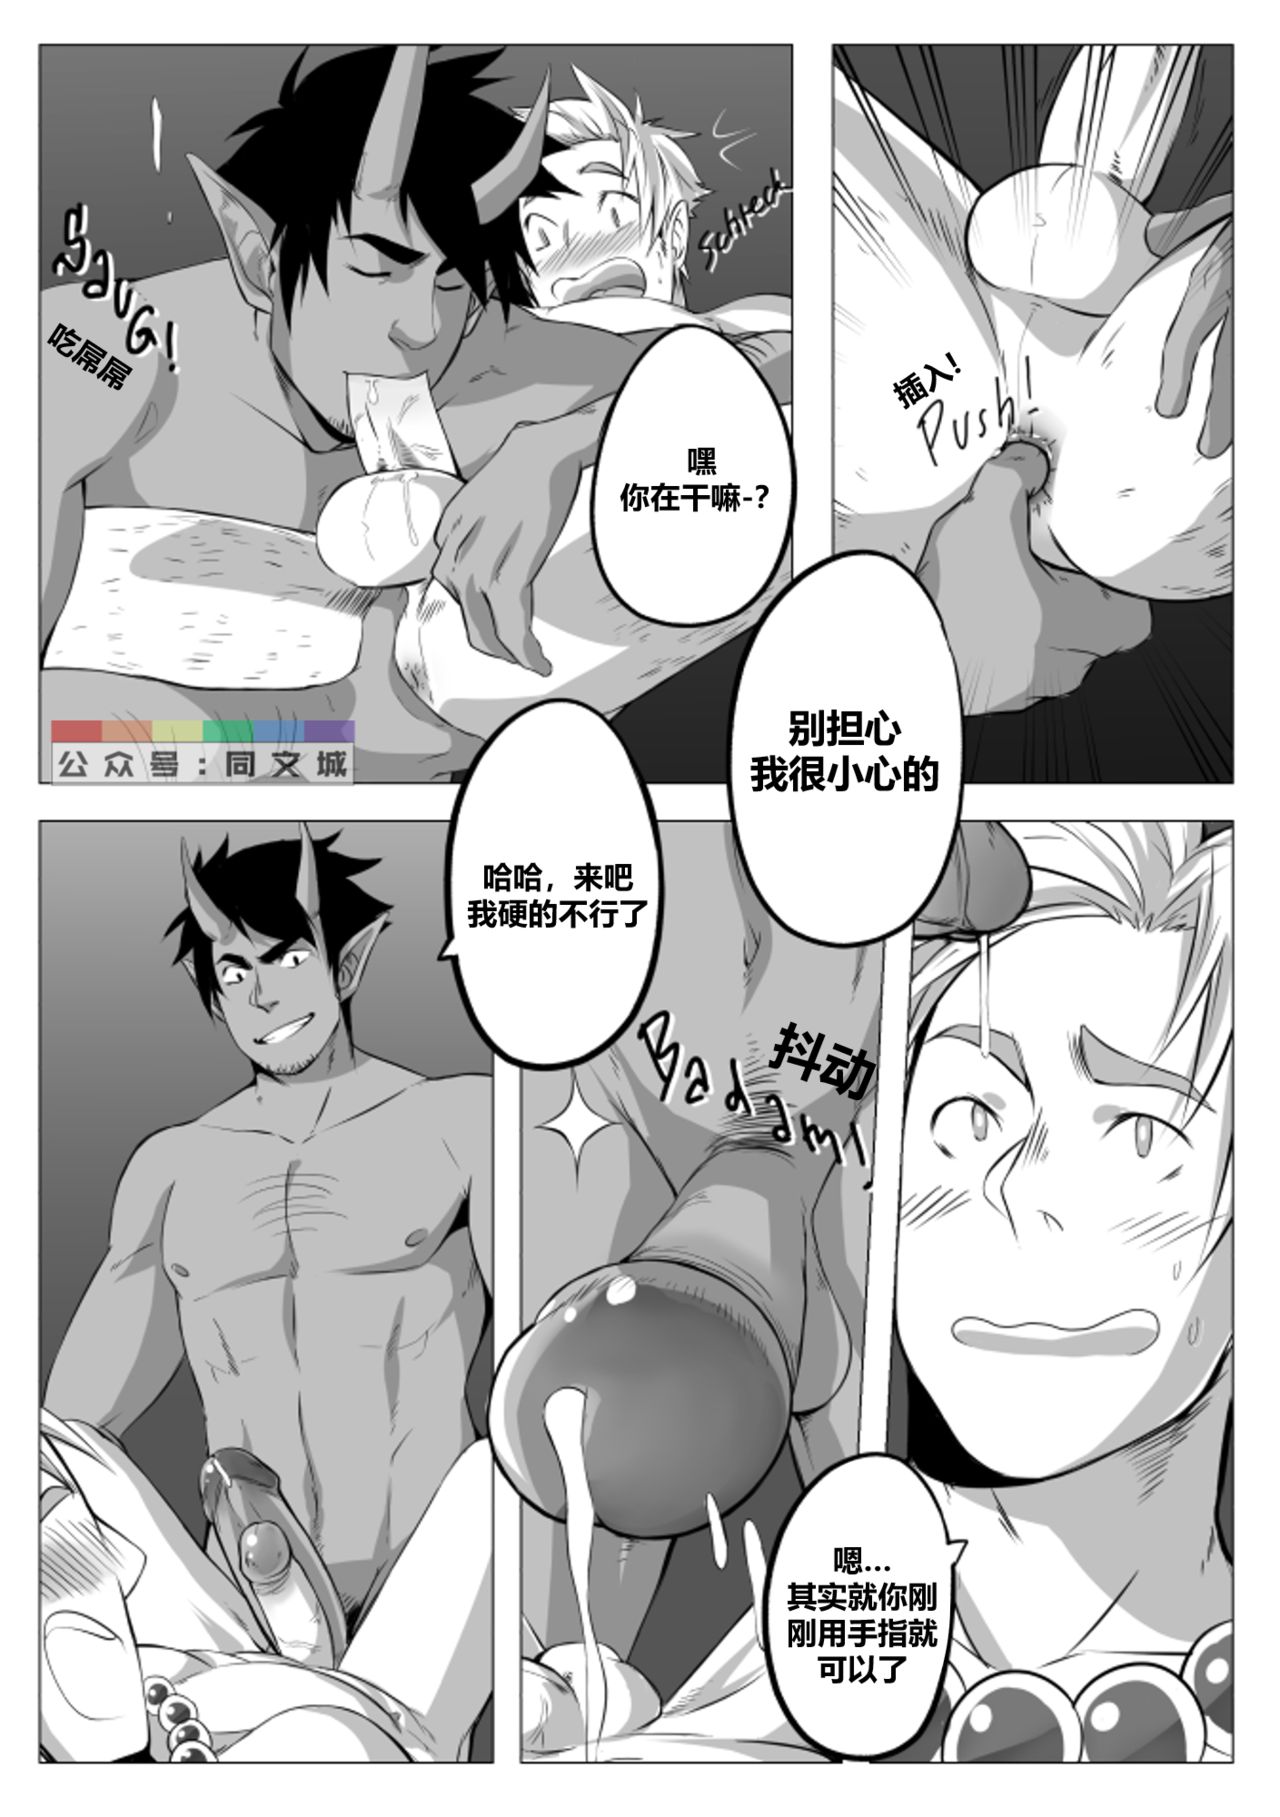 Jasdavi – Keep it Clean!（Chinese） page 10 full